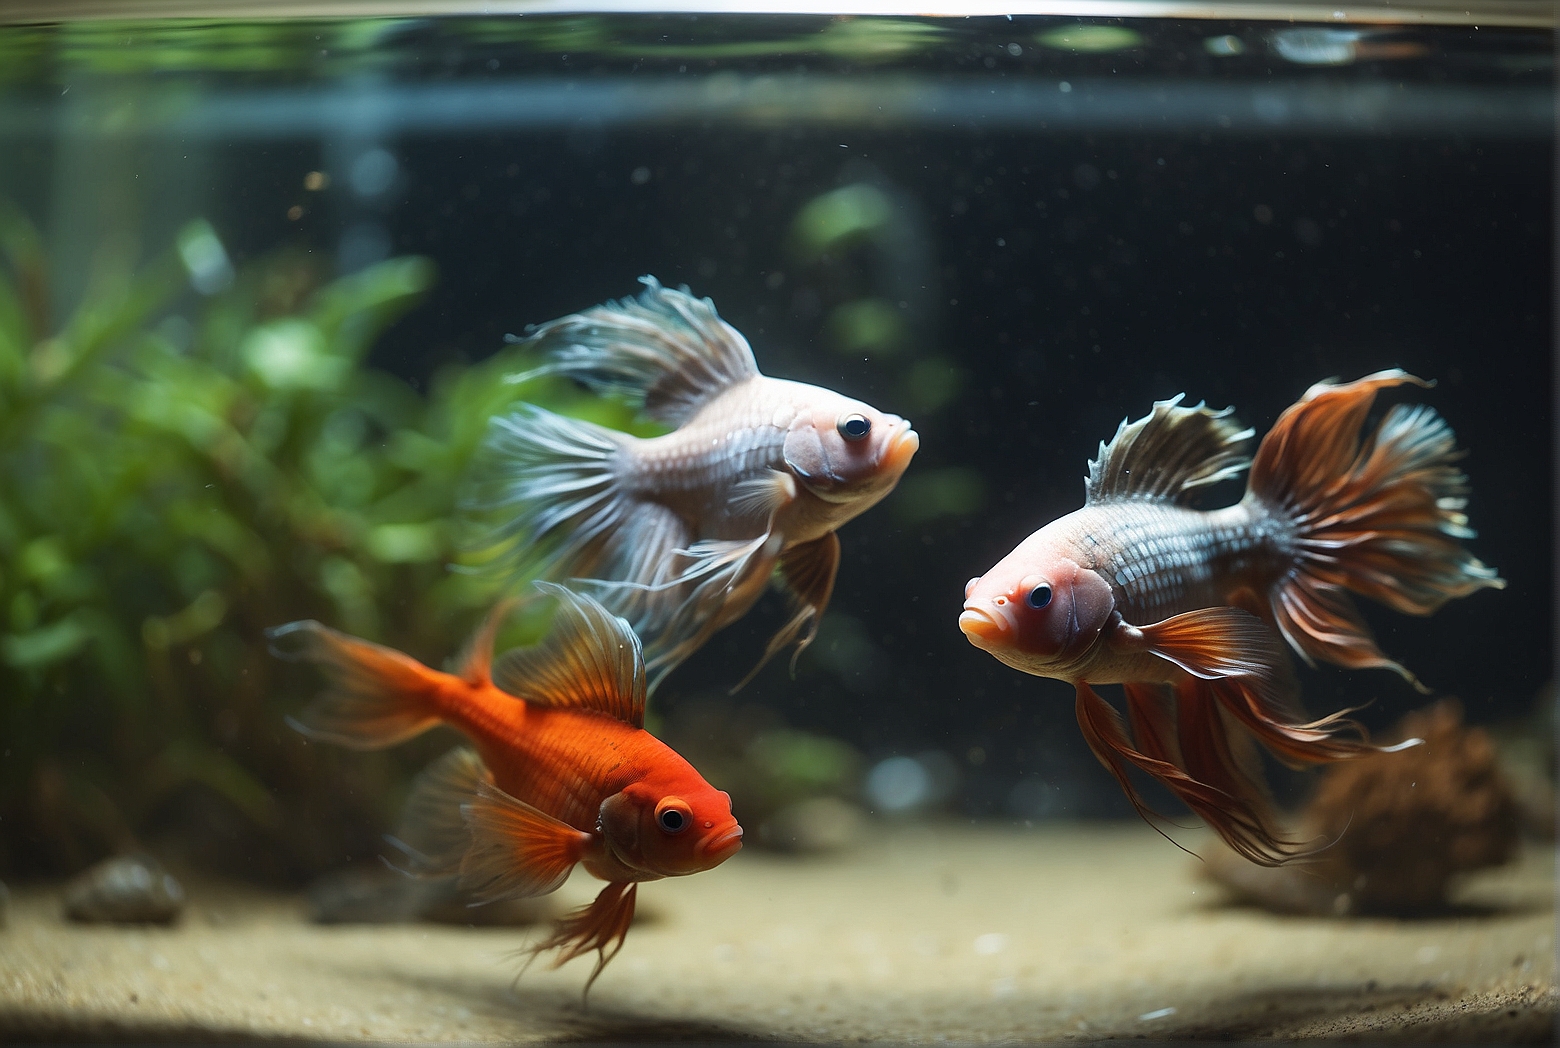 How to Keep Platies and Bettas Together